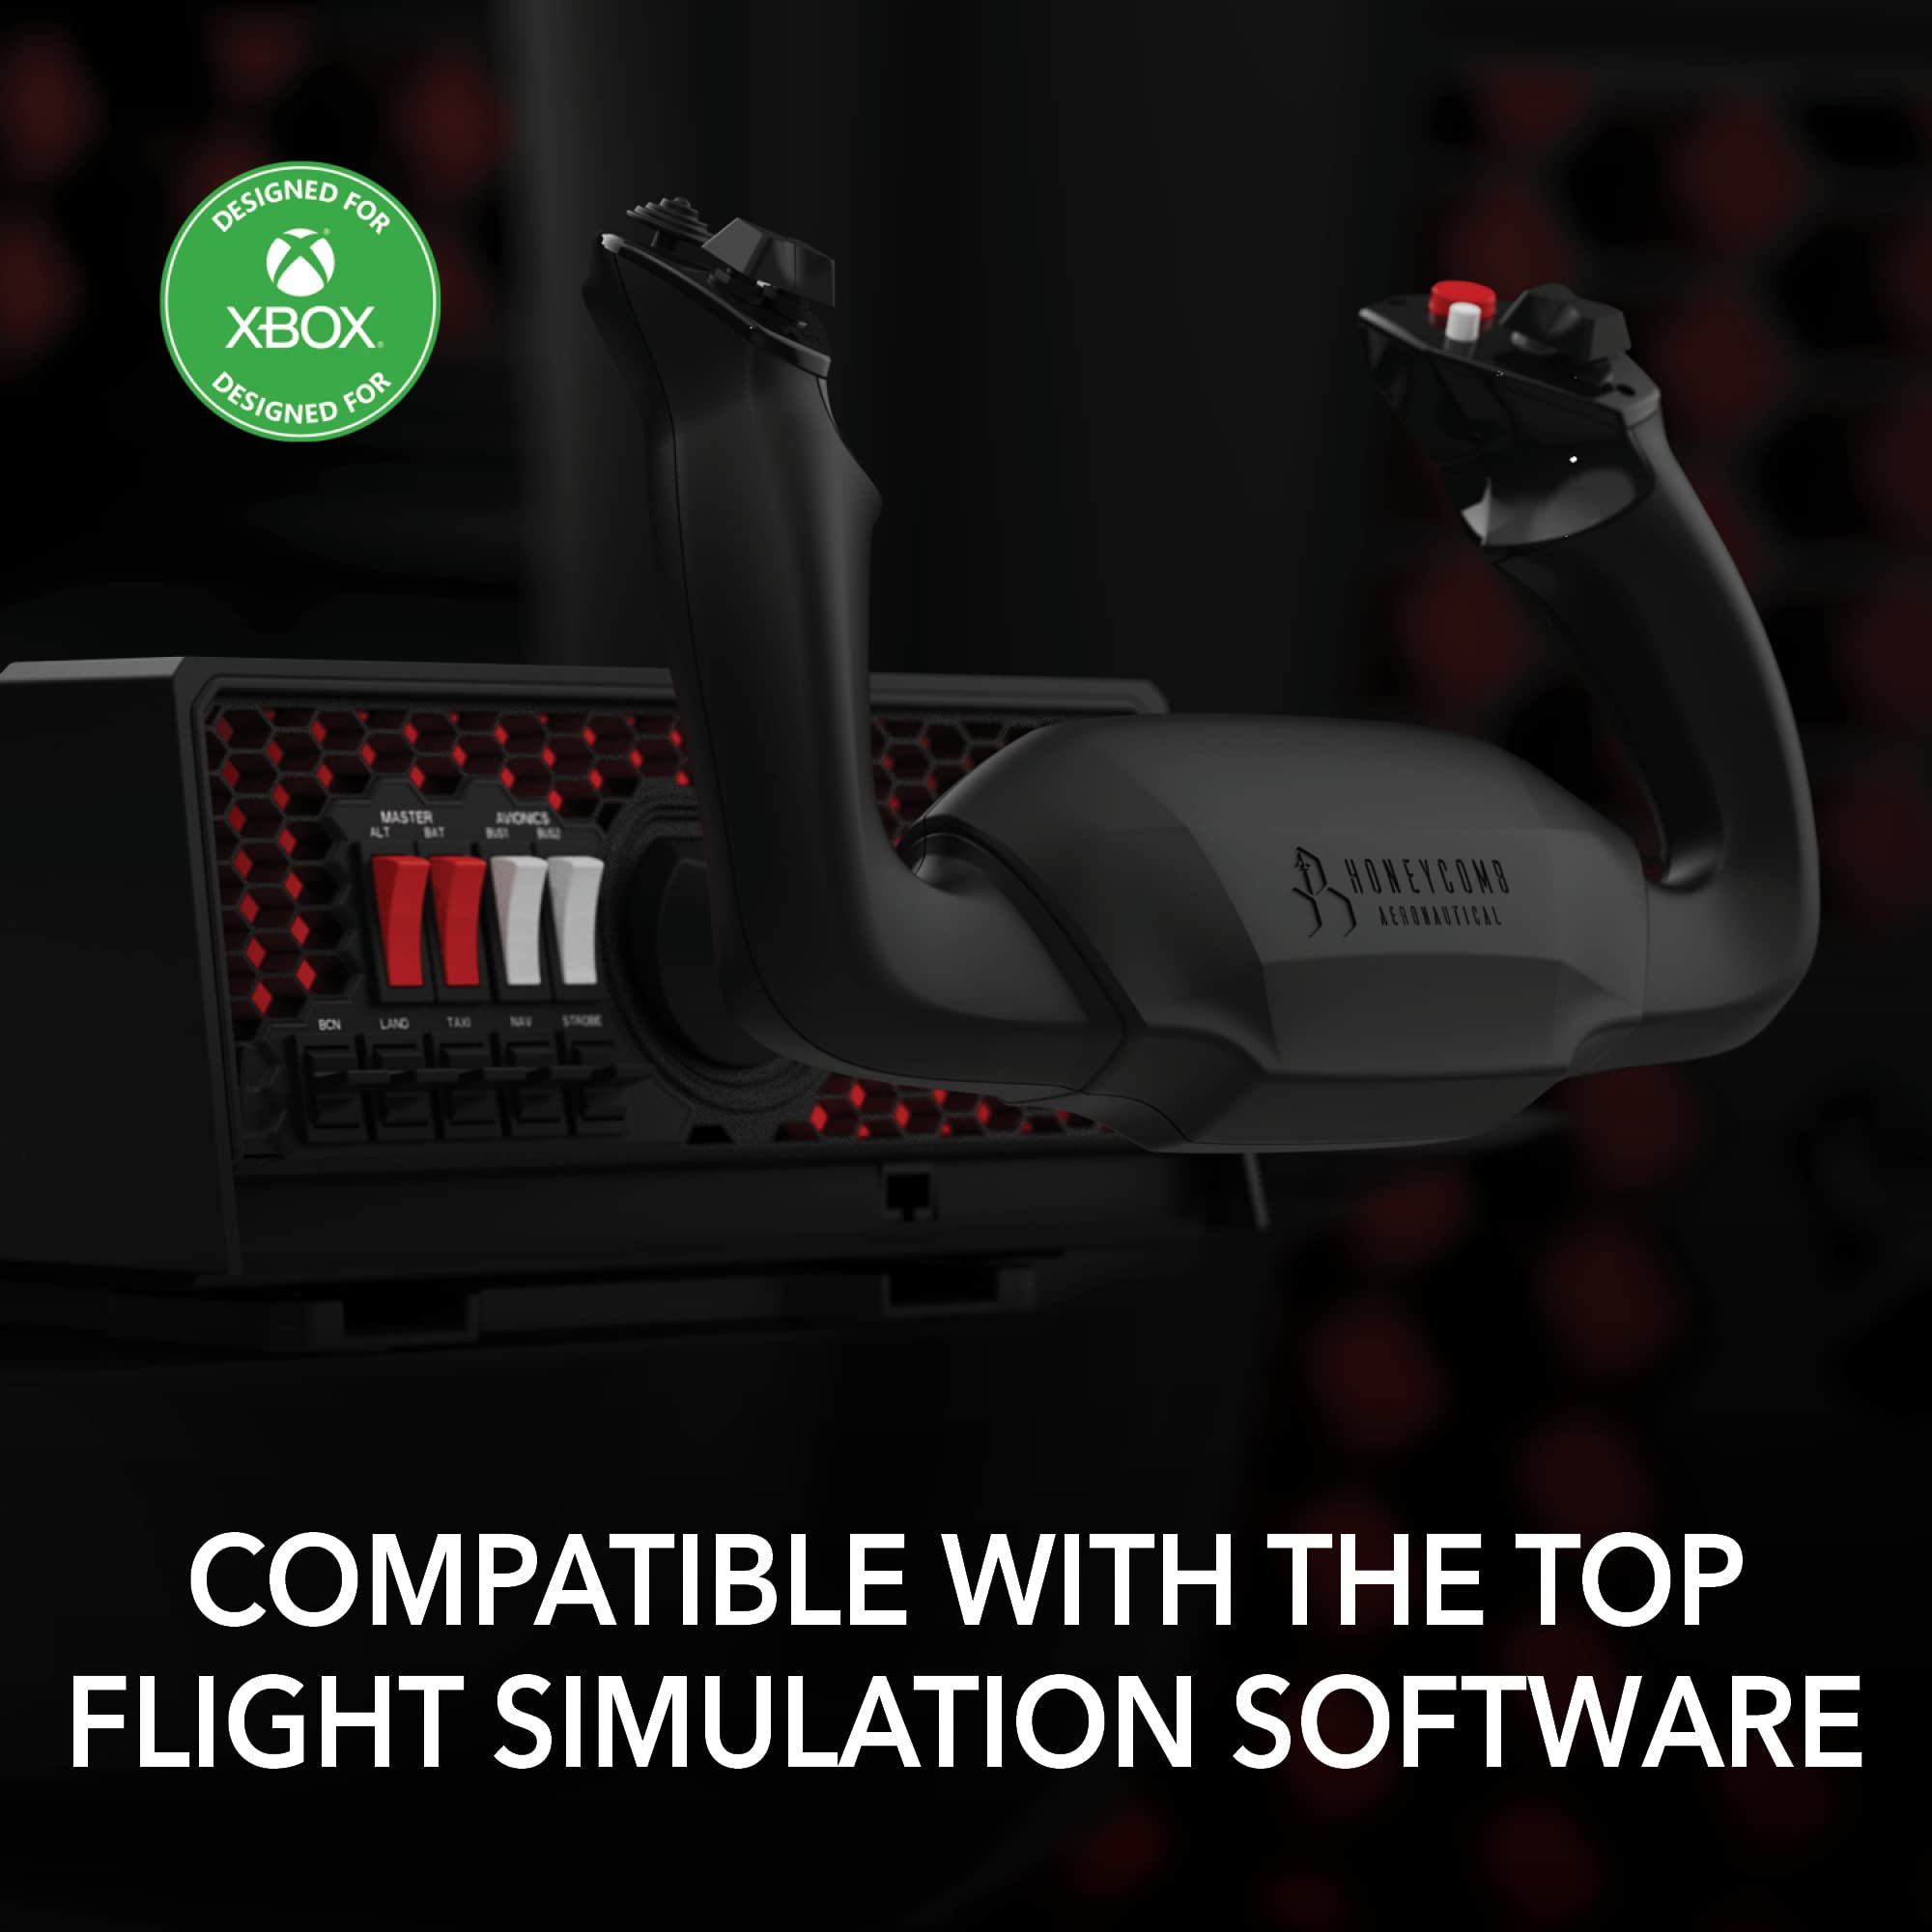 Honeycomb Aeronautical XPC Alpha Yoke & Switch Panel - Aviation Quality for Flight Simulators – Complete Home Cockpit Control System for Student Pilots and Flight Sim Enthusiasts – XBOX/PC